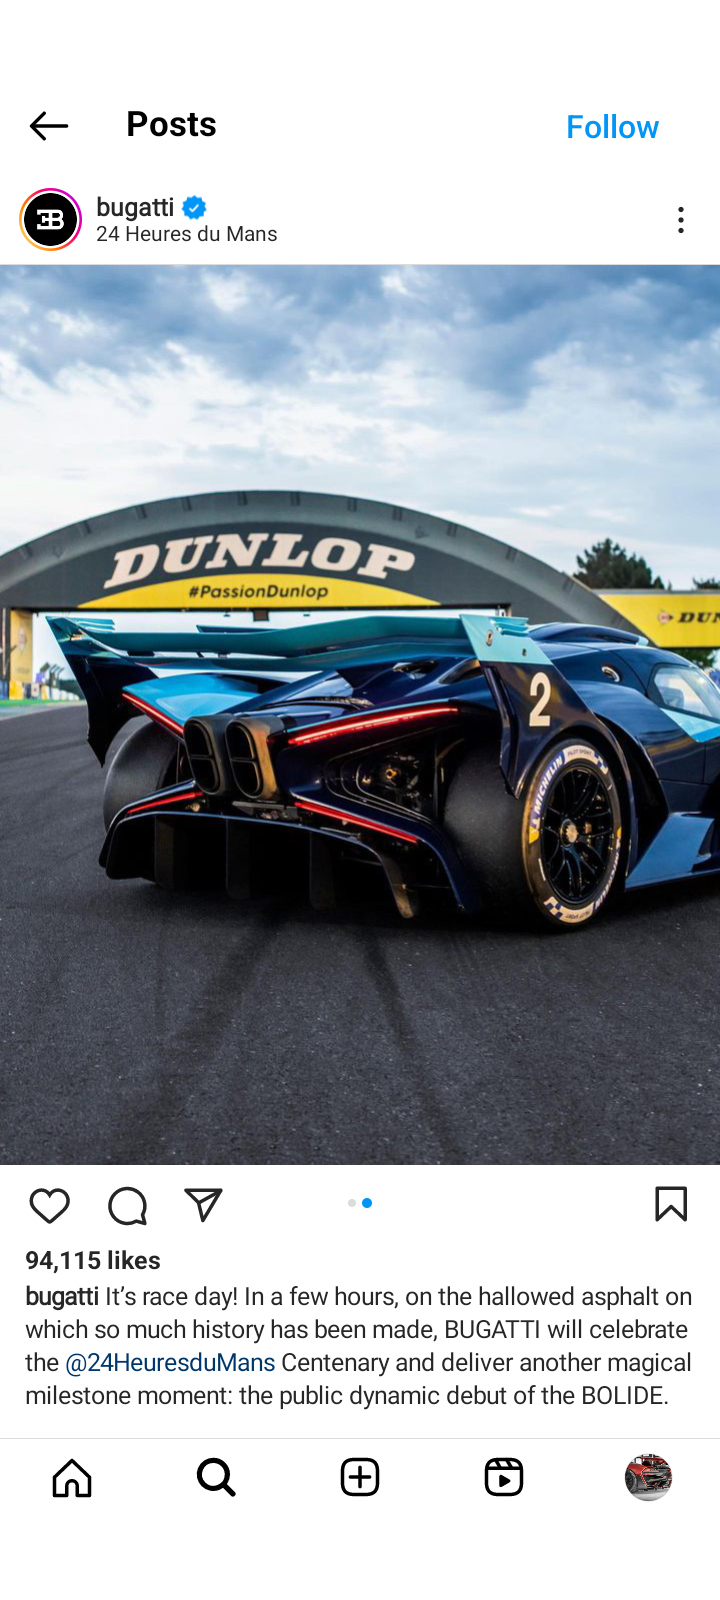 BUGATTI BOLIDE: Public Debut at 24 Hours of Le Mans Centenary